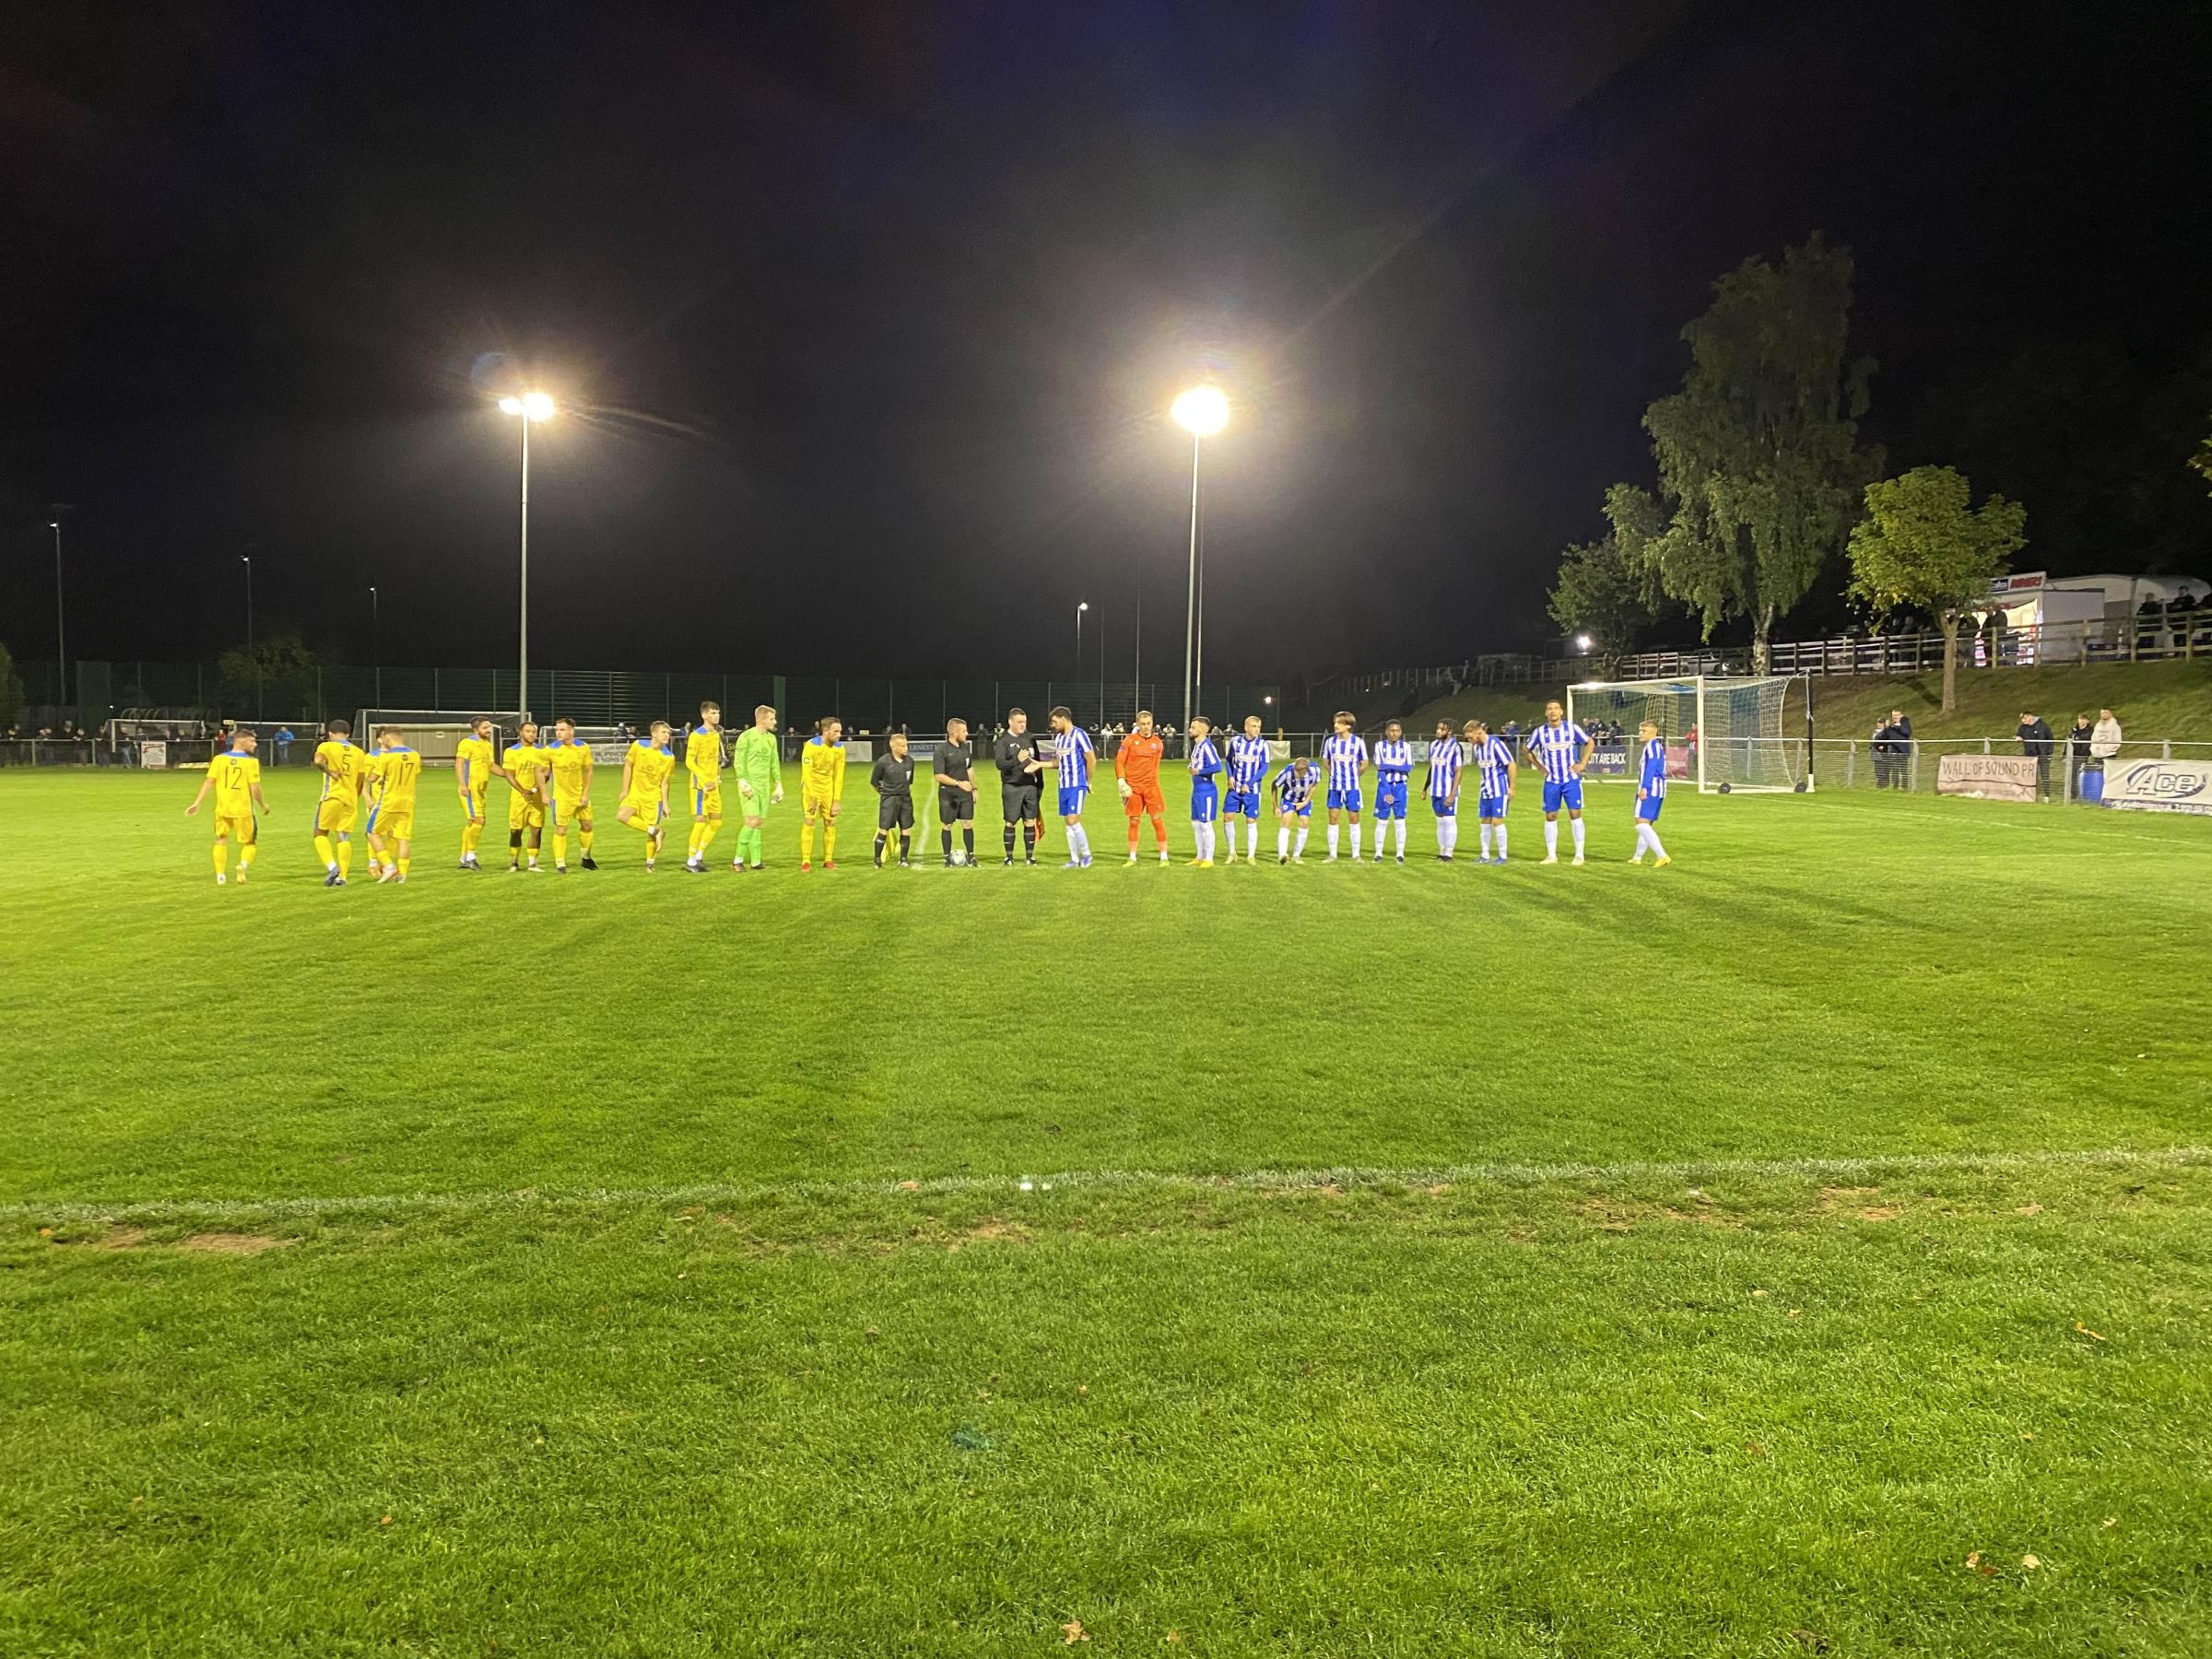 Worcester City concede twice in injury time to lose 3-1 to Tividale